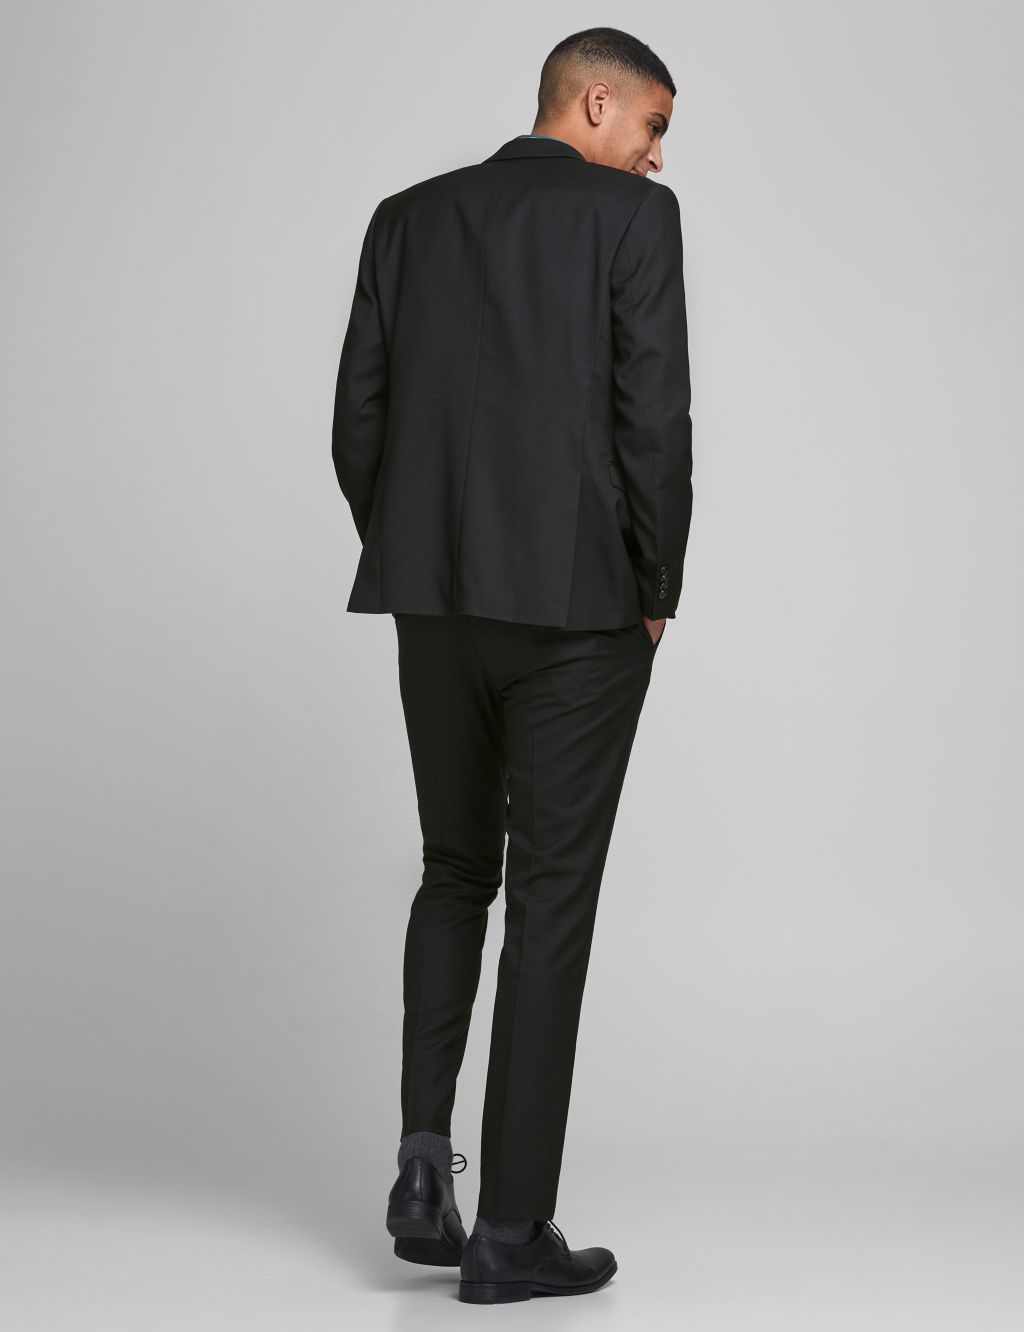 Tailored Fit Blazer 6 of 7